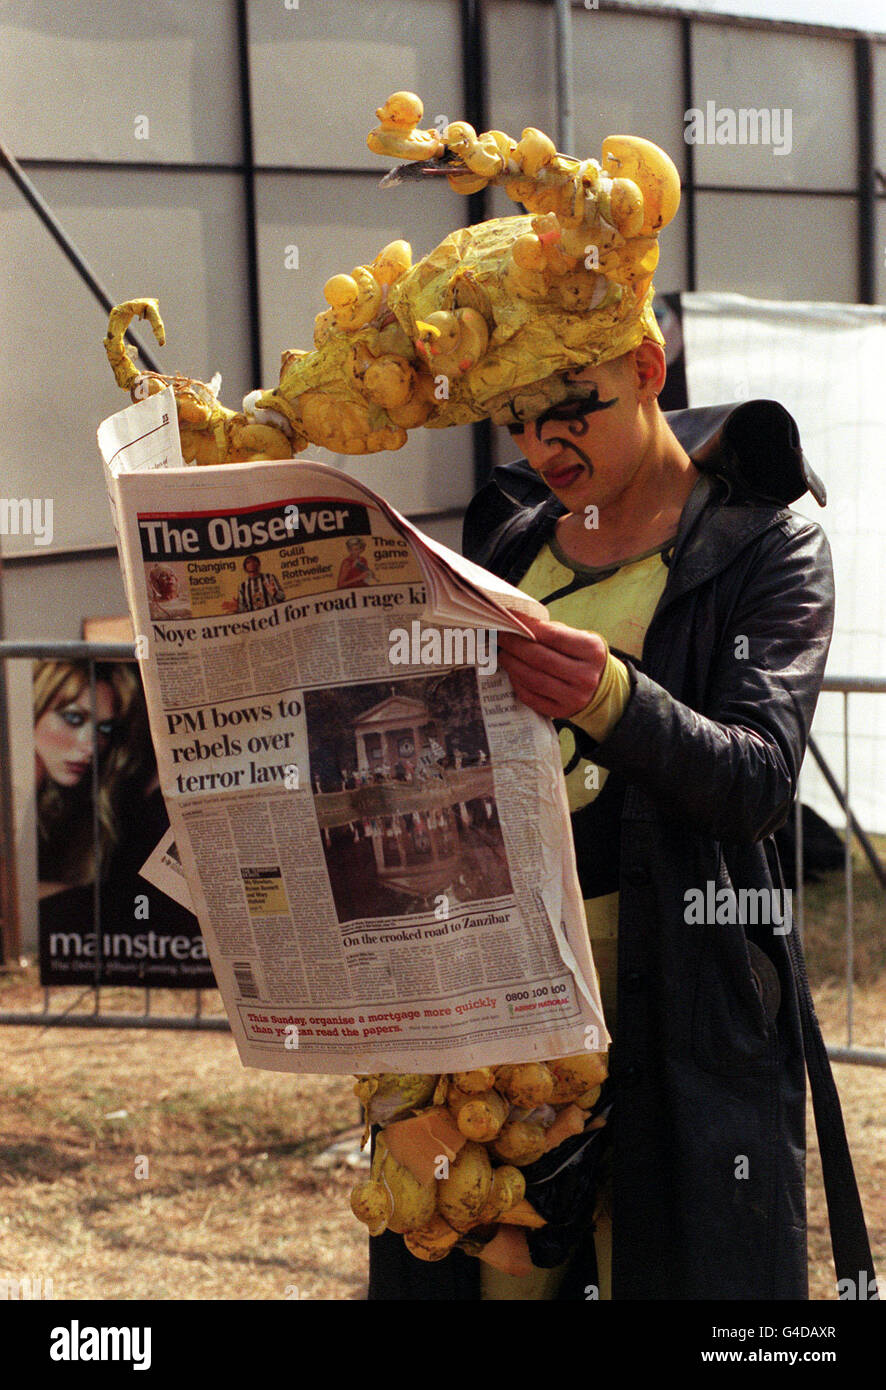 PA NEWS PHOTO 30/08/98 A BIZARRELY-DRESSED FESTIVAL-GOER CATCHES UP WITH THE NEWS AT READING. Stock Photo